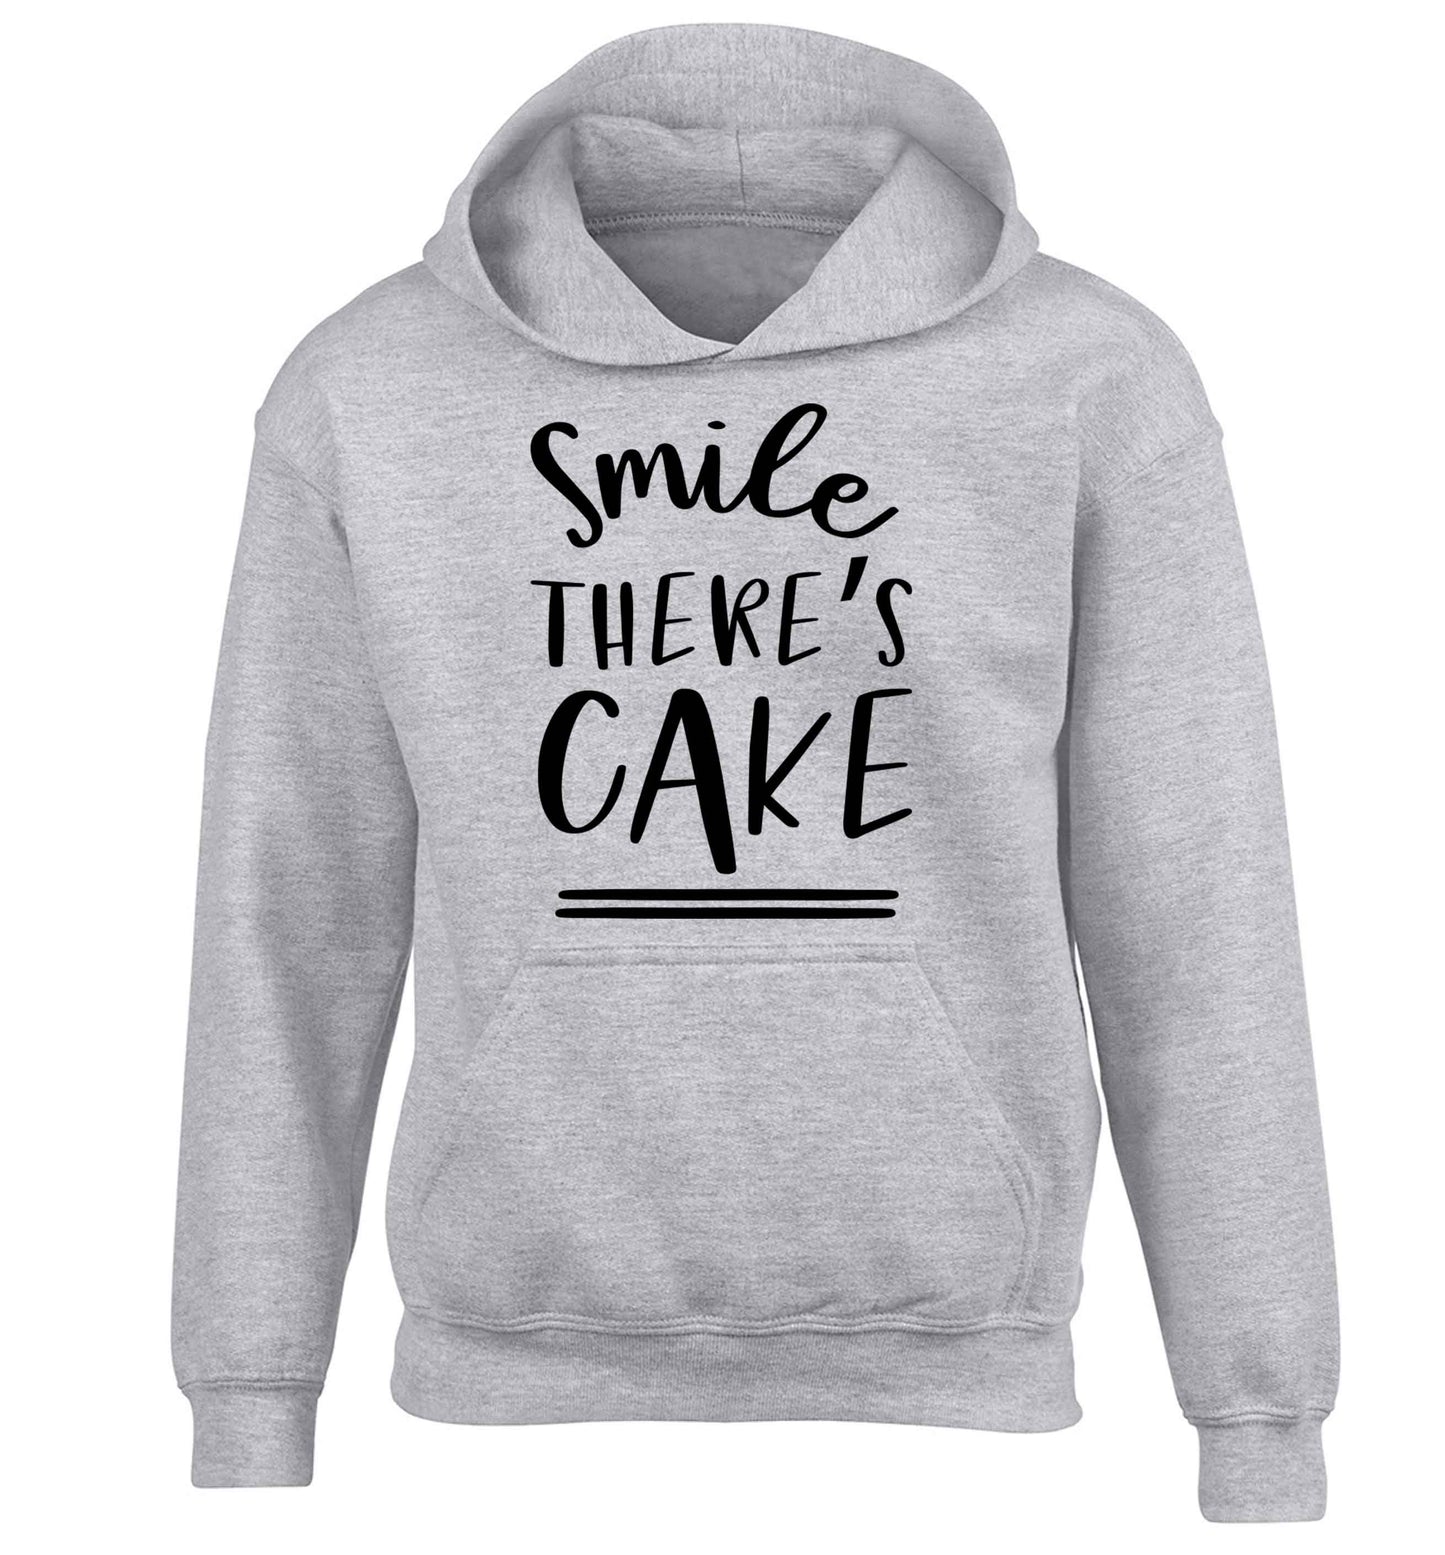 Smile there's cake children's grey hoodie 12-13 Years